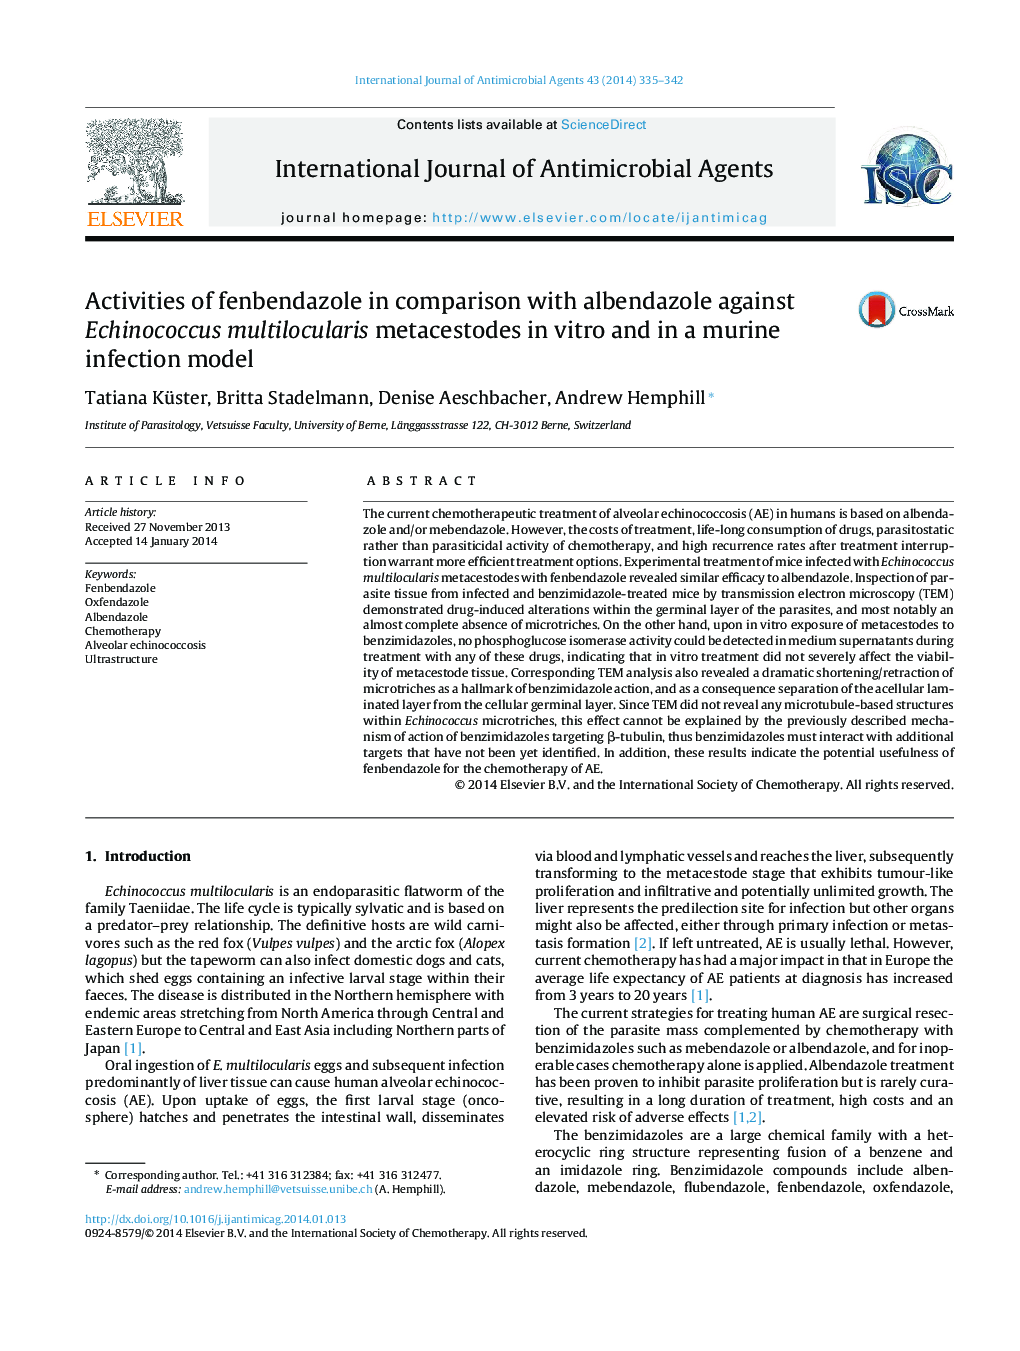 Activities of fenbendazole in comparison with albendazole against Echinococcus multilocularis metacestodes in vitro and in a murine infection model